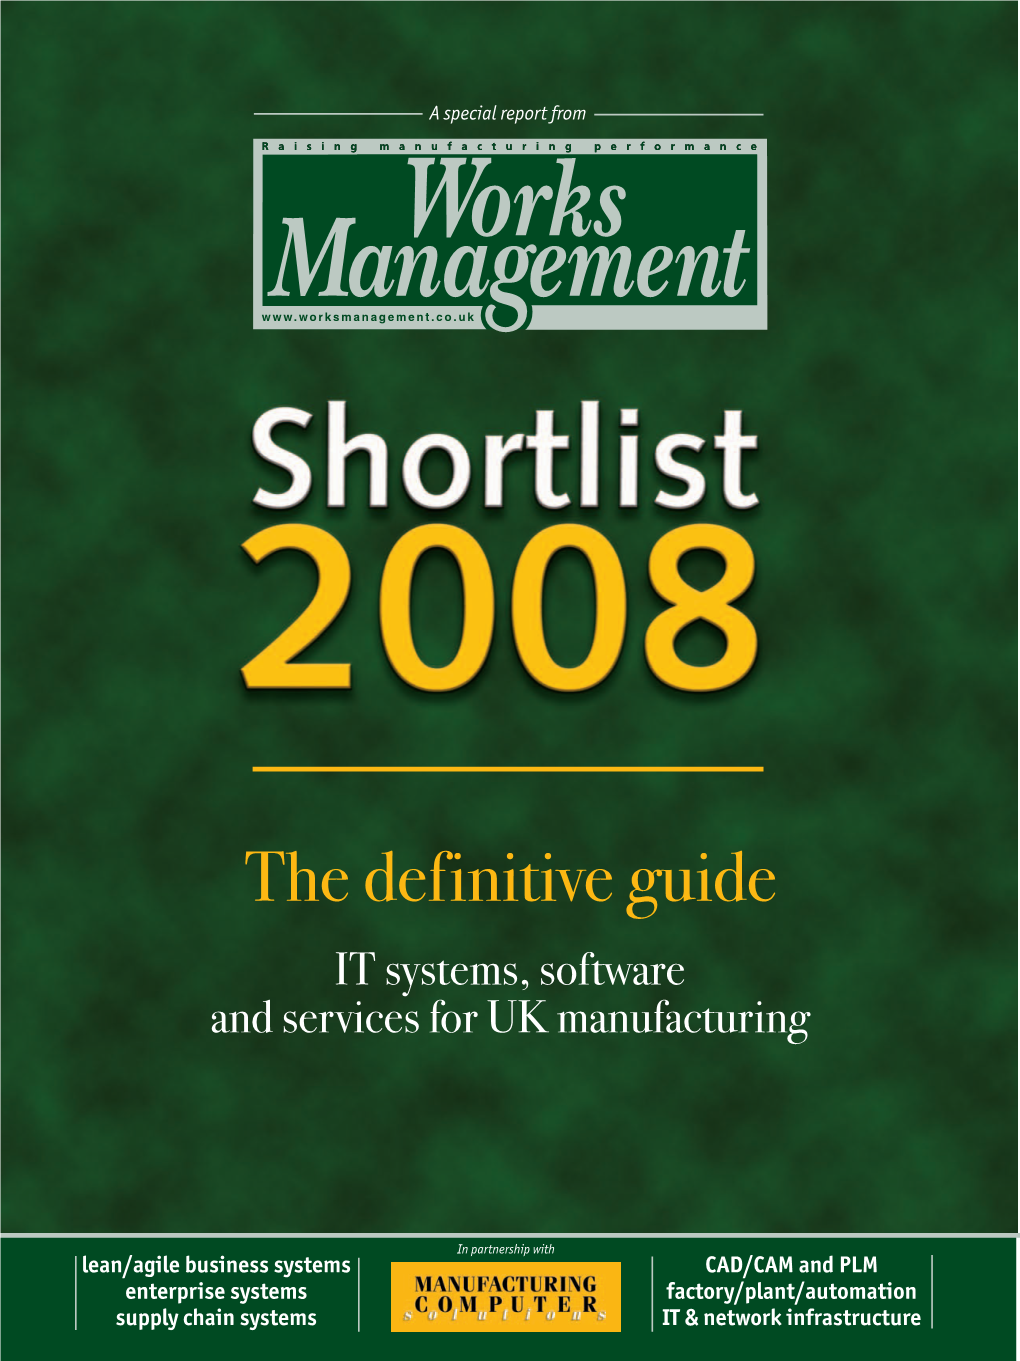 The Definitive Guide IT Systems, Software and Services for UK Manufacturing